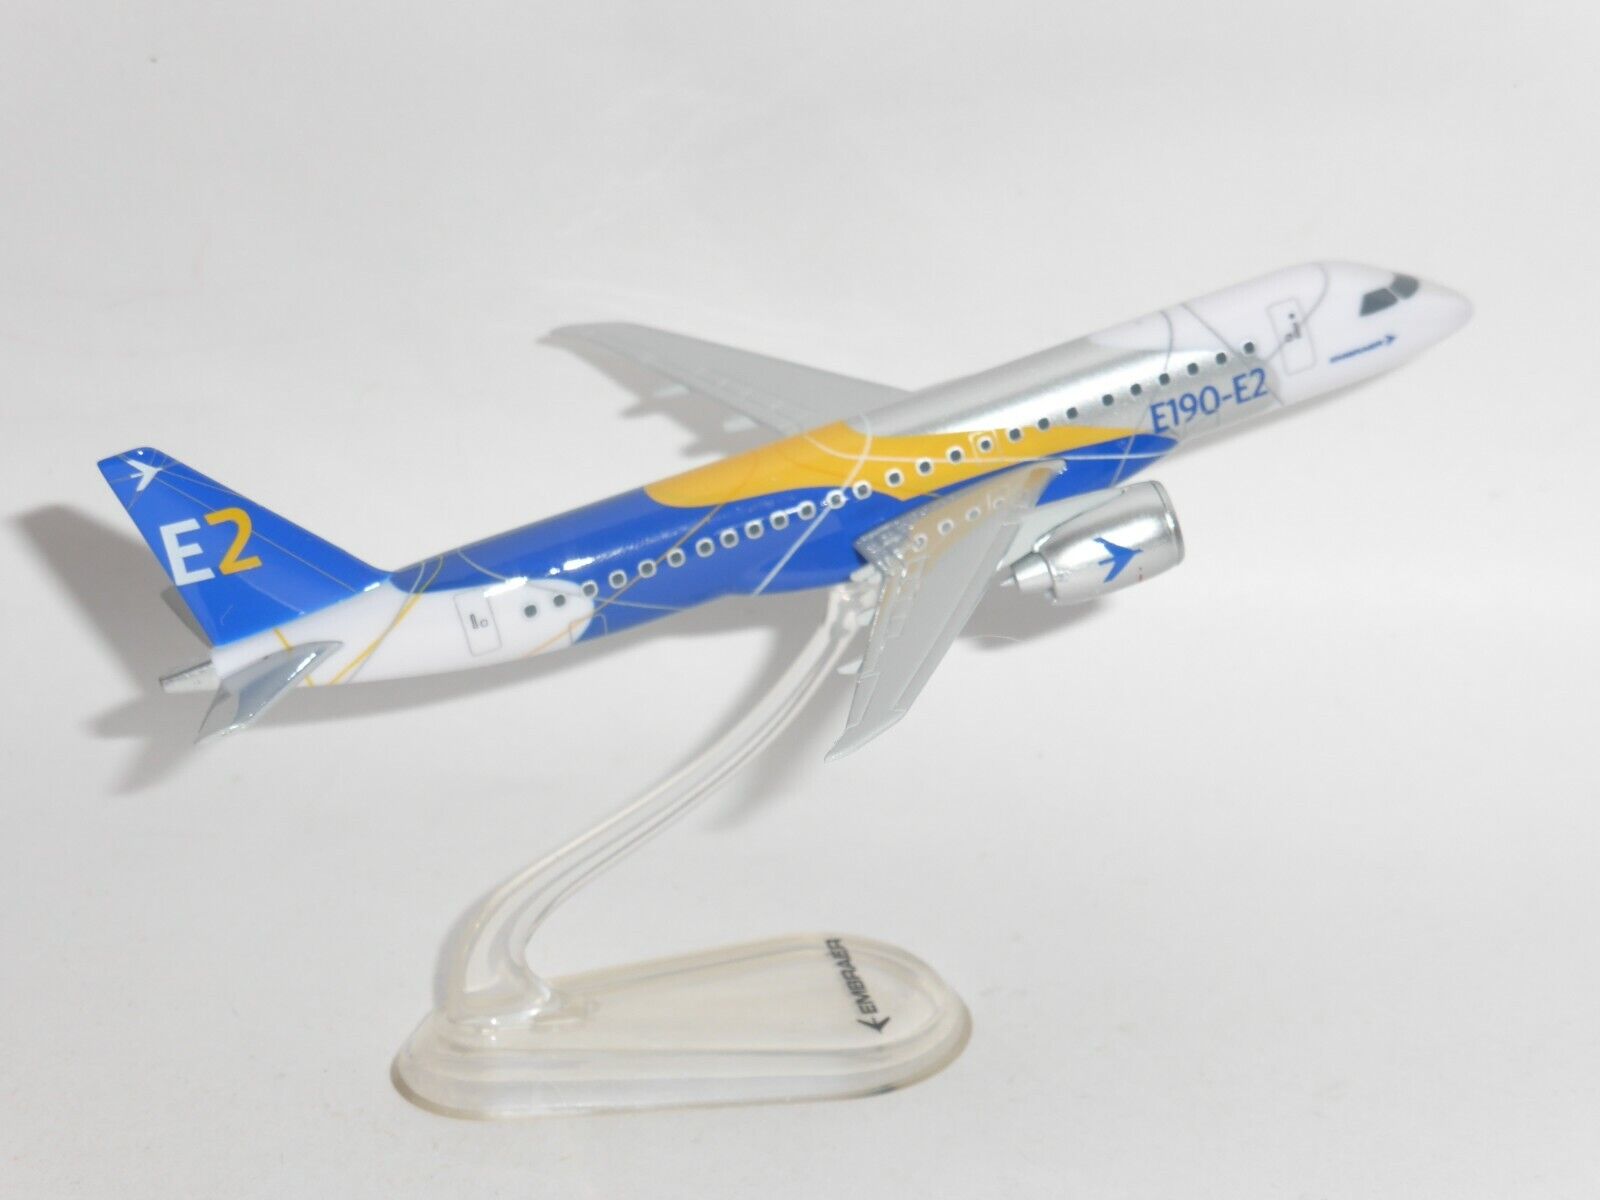 Embraer ERJ-190-E2 House / Demo Livery Lupa Airliner Collectors Model 1:250